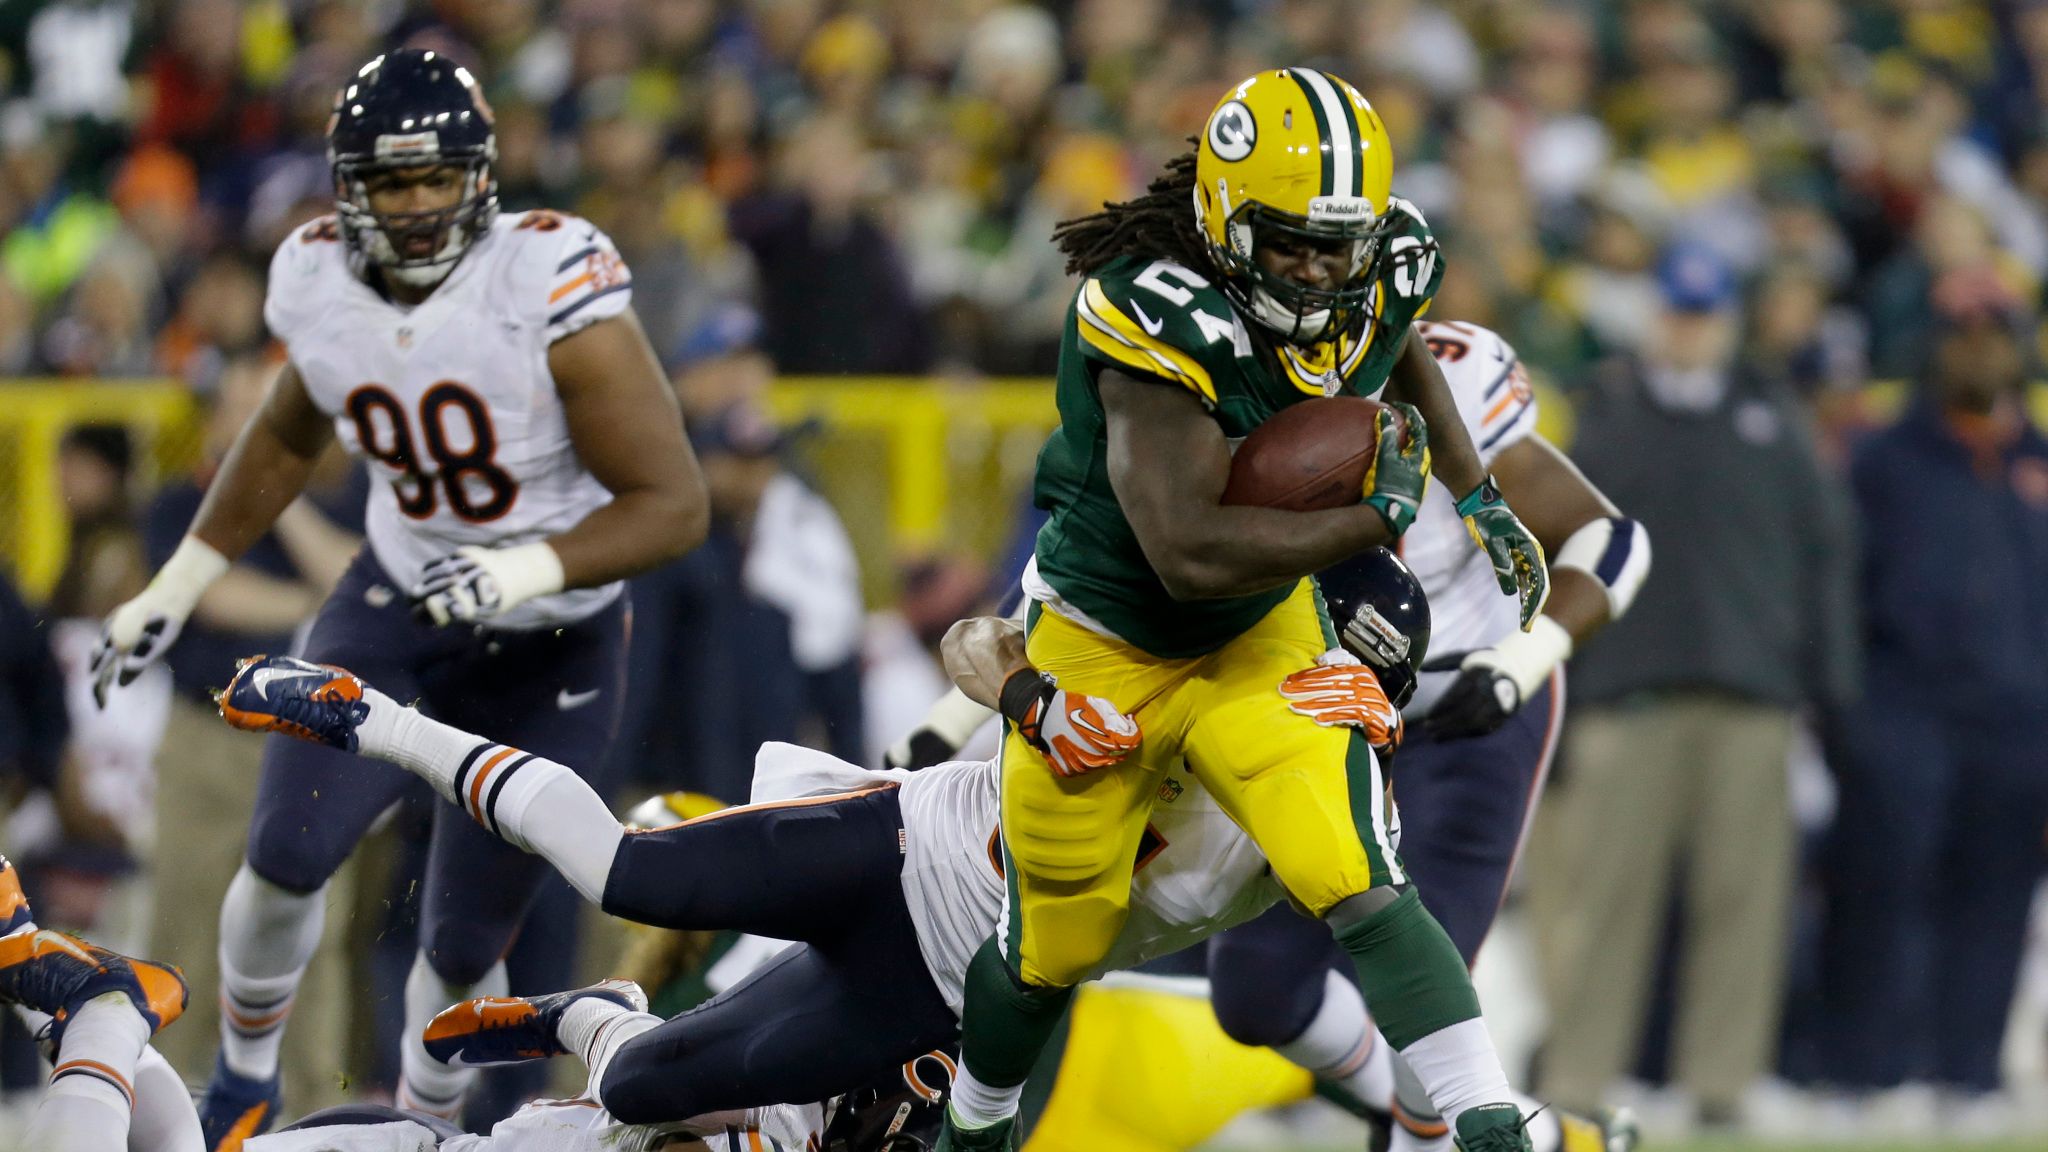 Packers look to carry on after rough game for Eddie Lacy – The Oakland Press